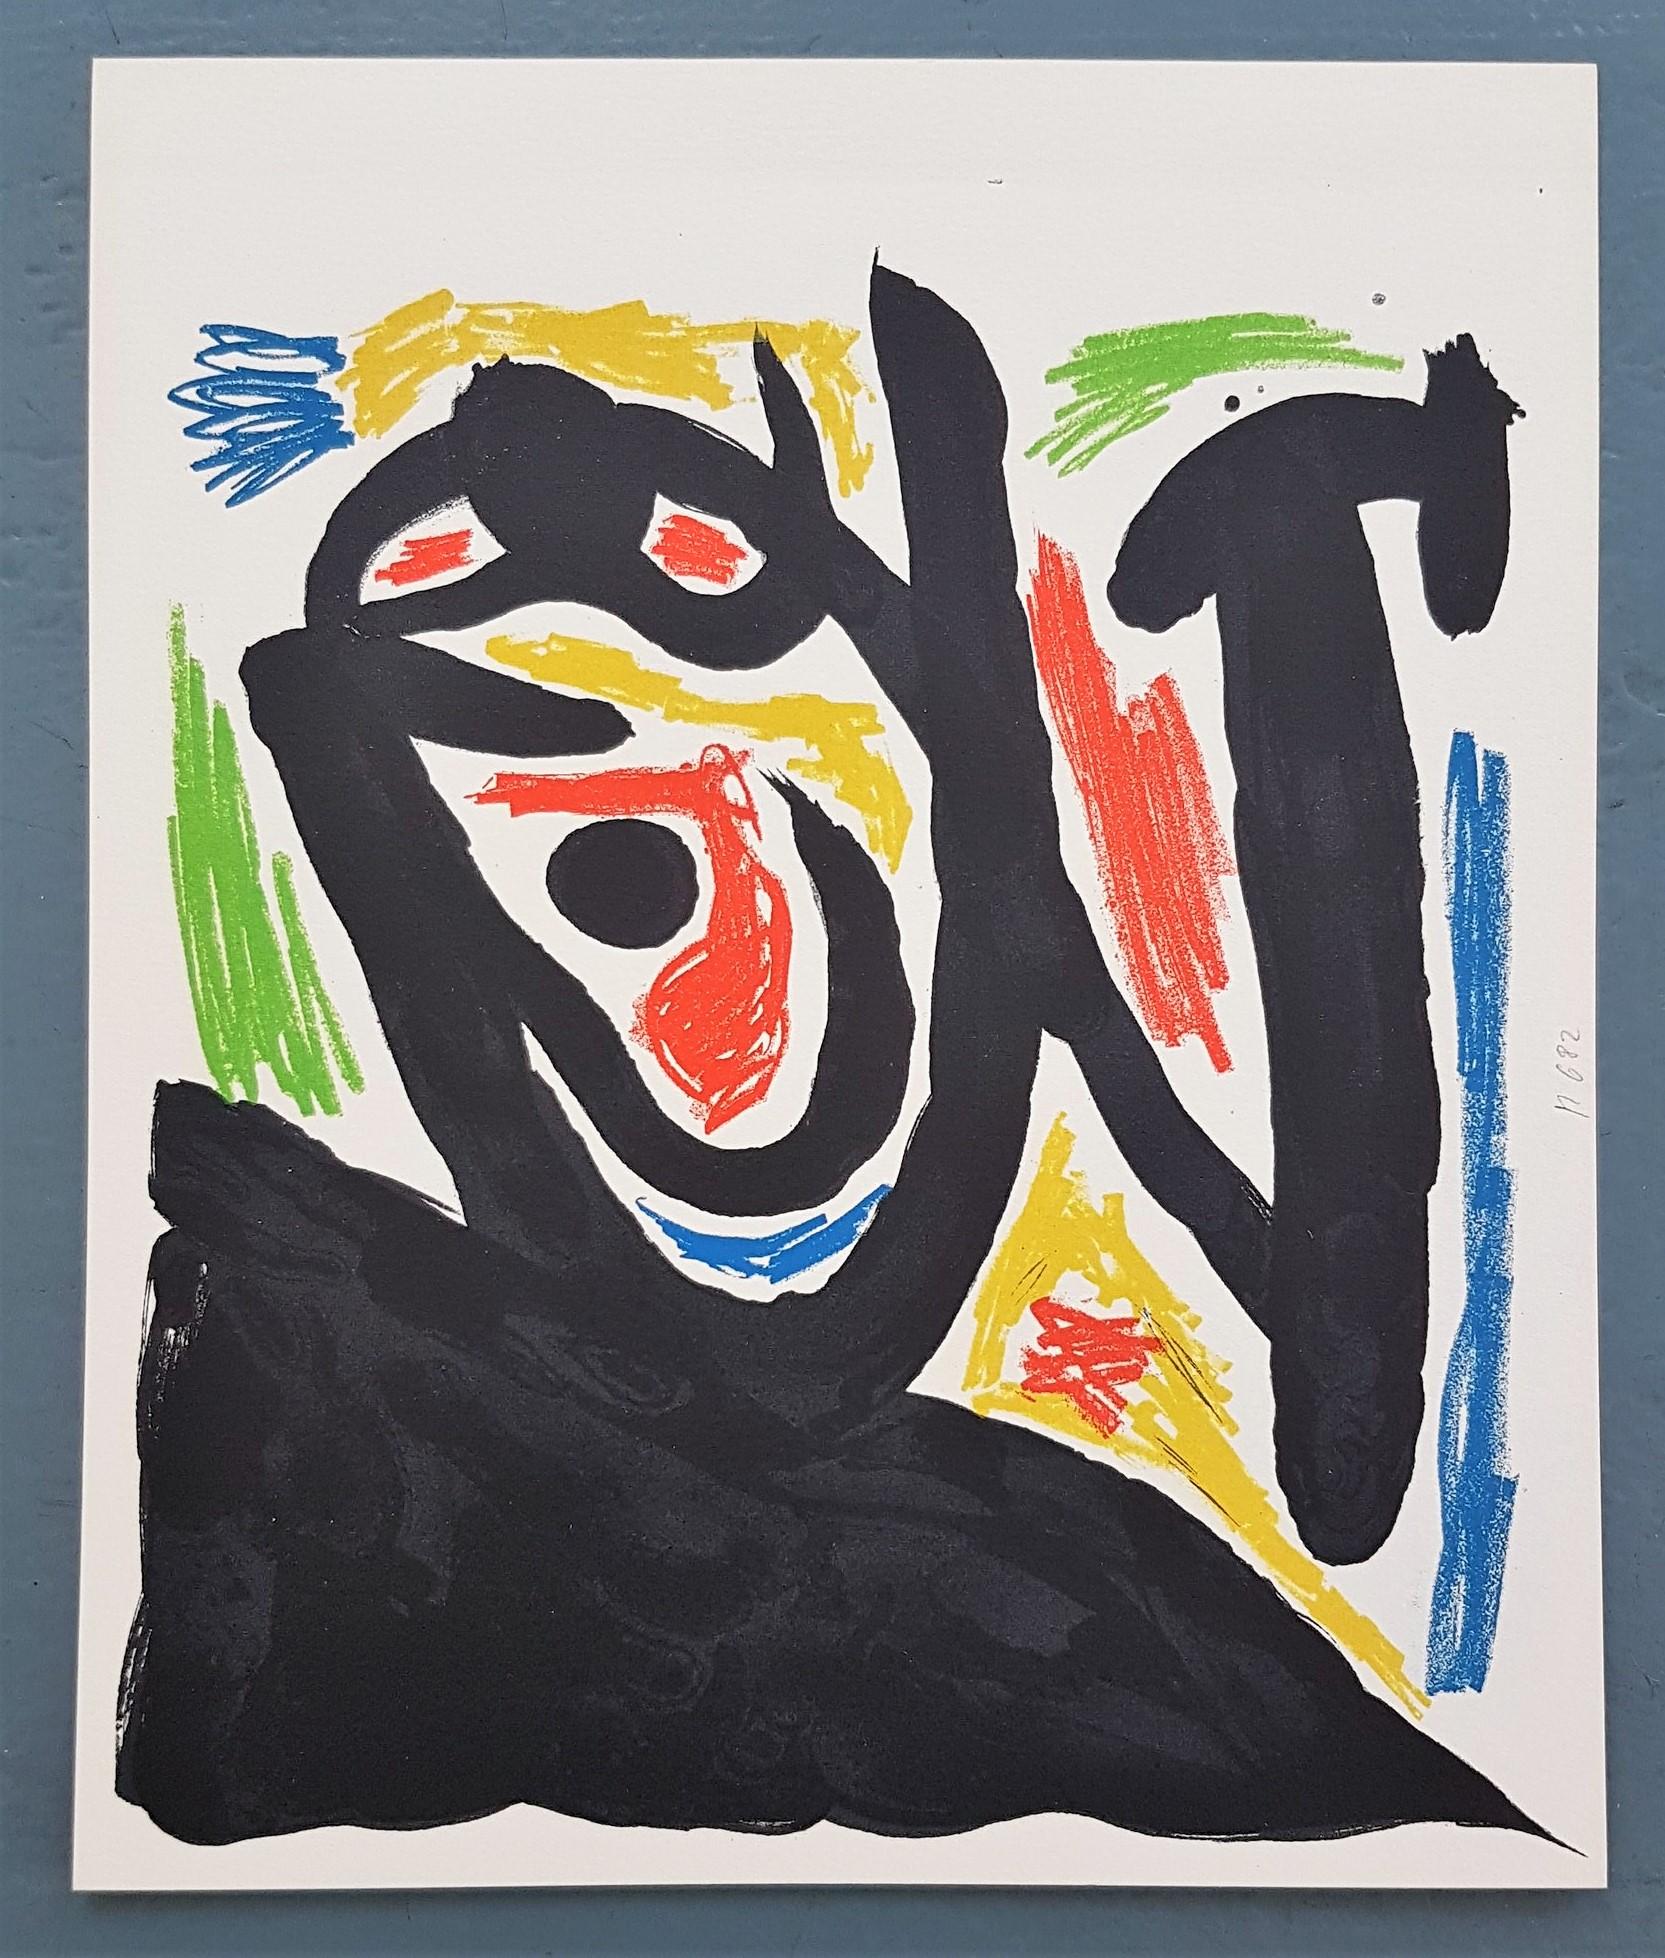 "Untitled" (one plate from "Maitres-Graveurs Contemporains" - Berggruen & Cie) - Print by Joan Miró